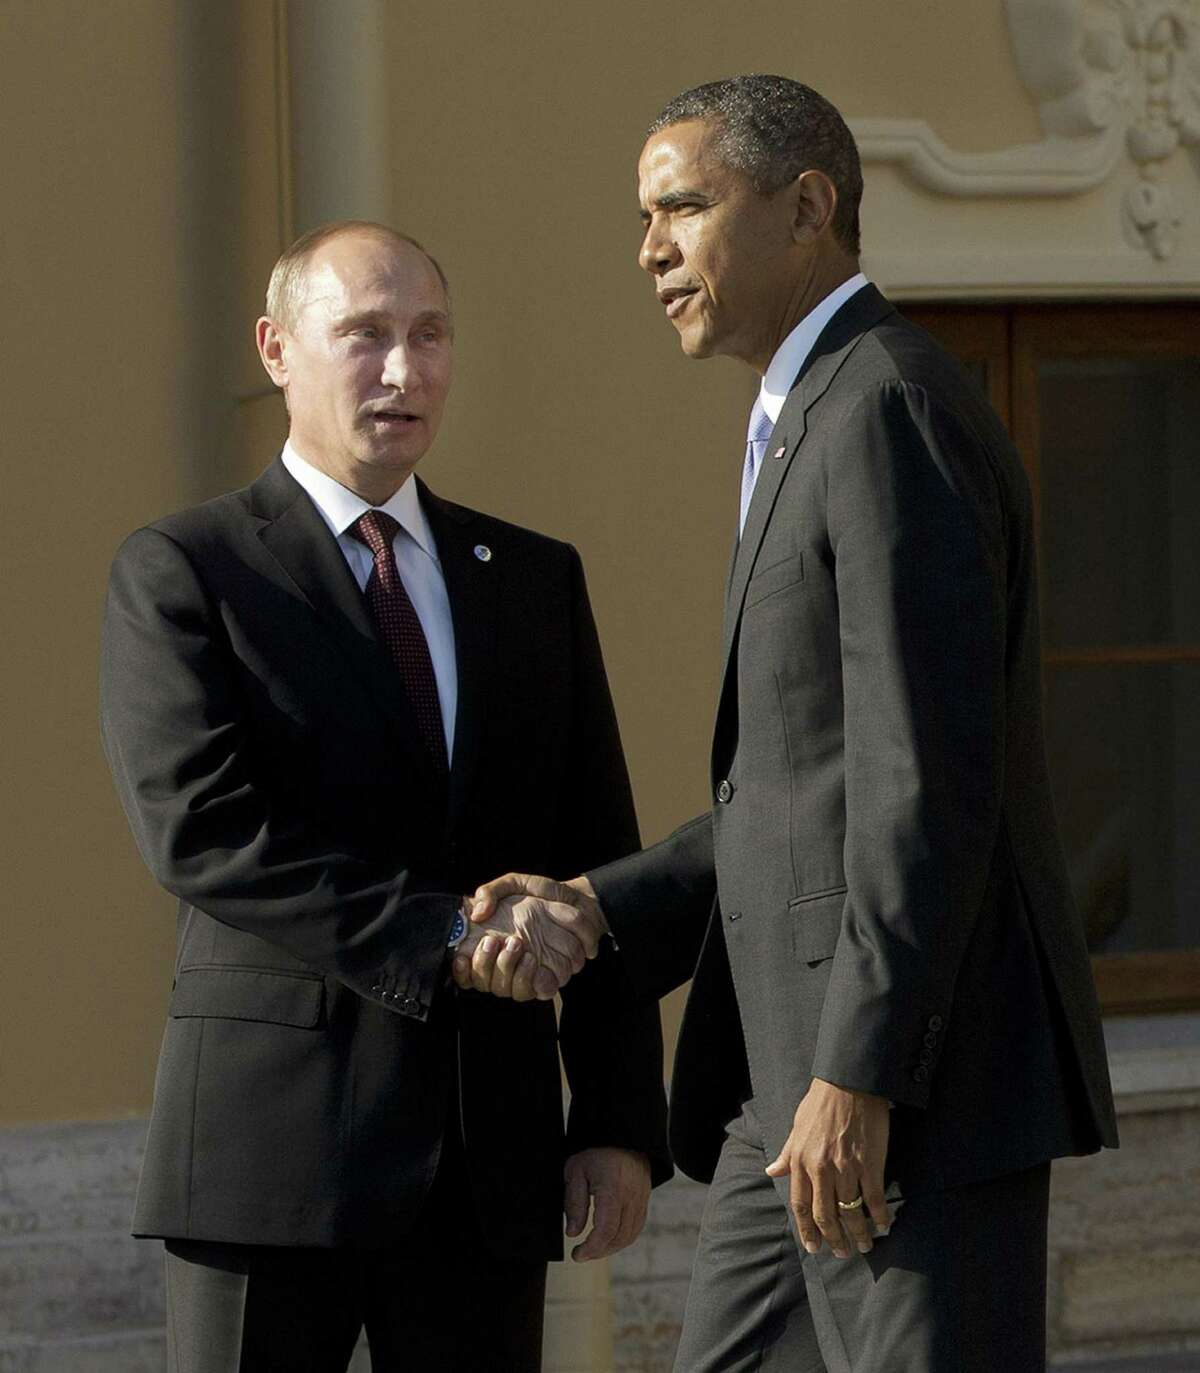 President Barack Obama tepidly shakes hands Thursday with Vladimir Putin as Obama arrived for the G-20 summit in St. Petersburg, Russia.